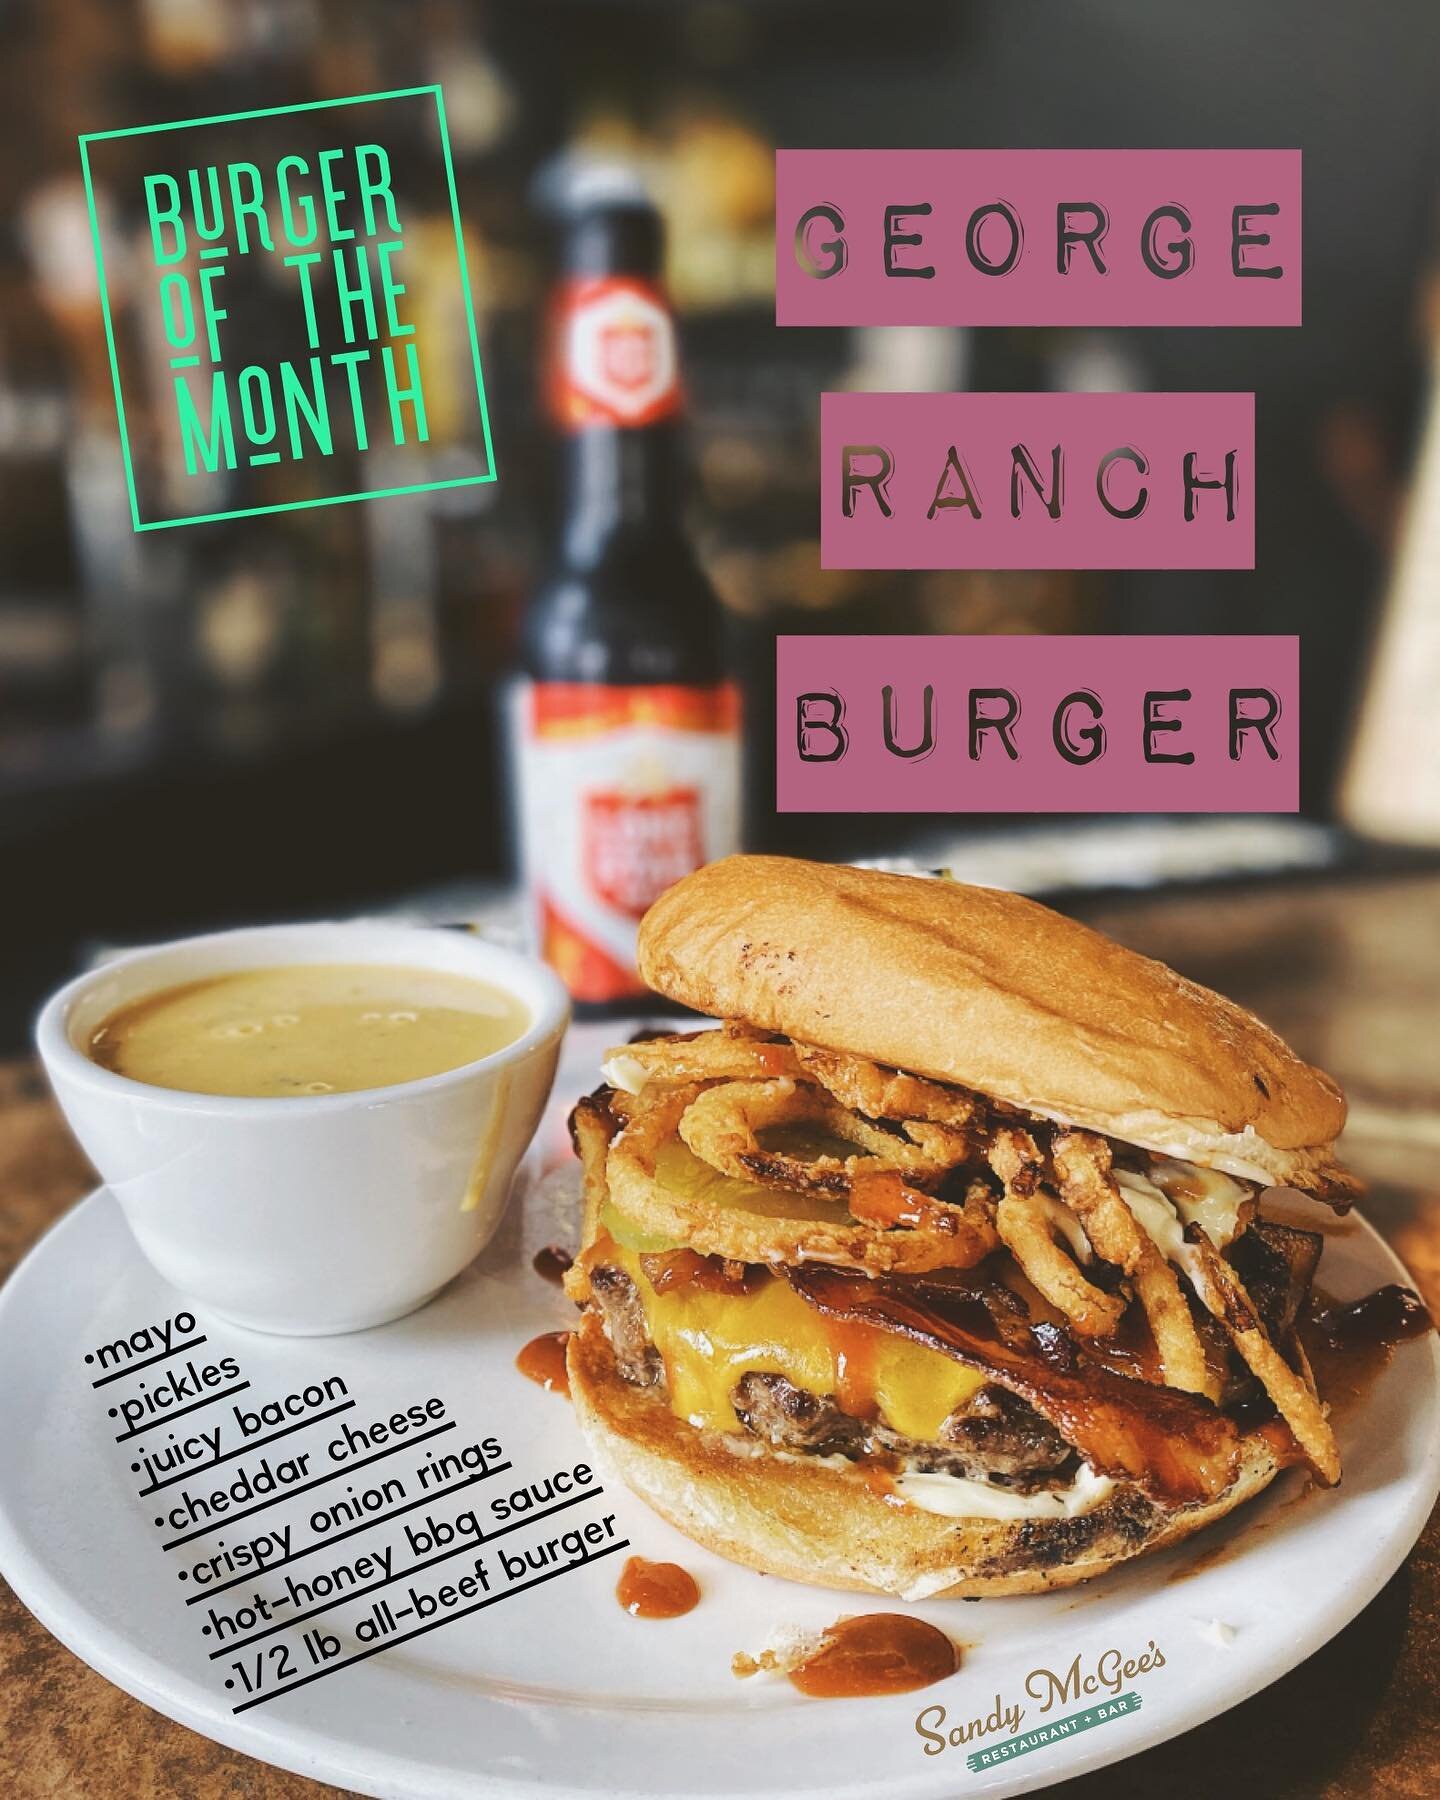 🚨 New Burger of the Month 🚨 

🐂🍔🐖🍔🐂🍔🐖🍔🐂🍔
The George Ranch Burger features a house-made spicy barbecue sauce, crispy onion strings, and fresh bacon atop our hand-formed, half-pound, all-beef burger! Available for all of June!